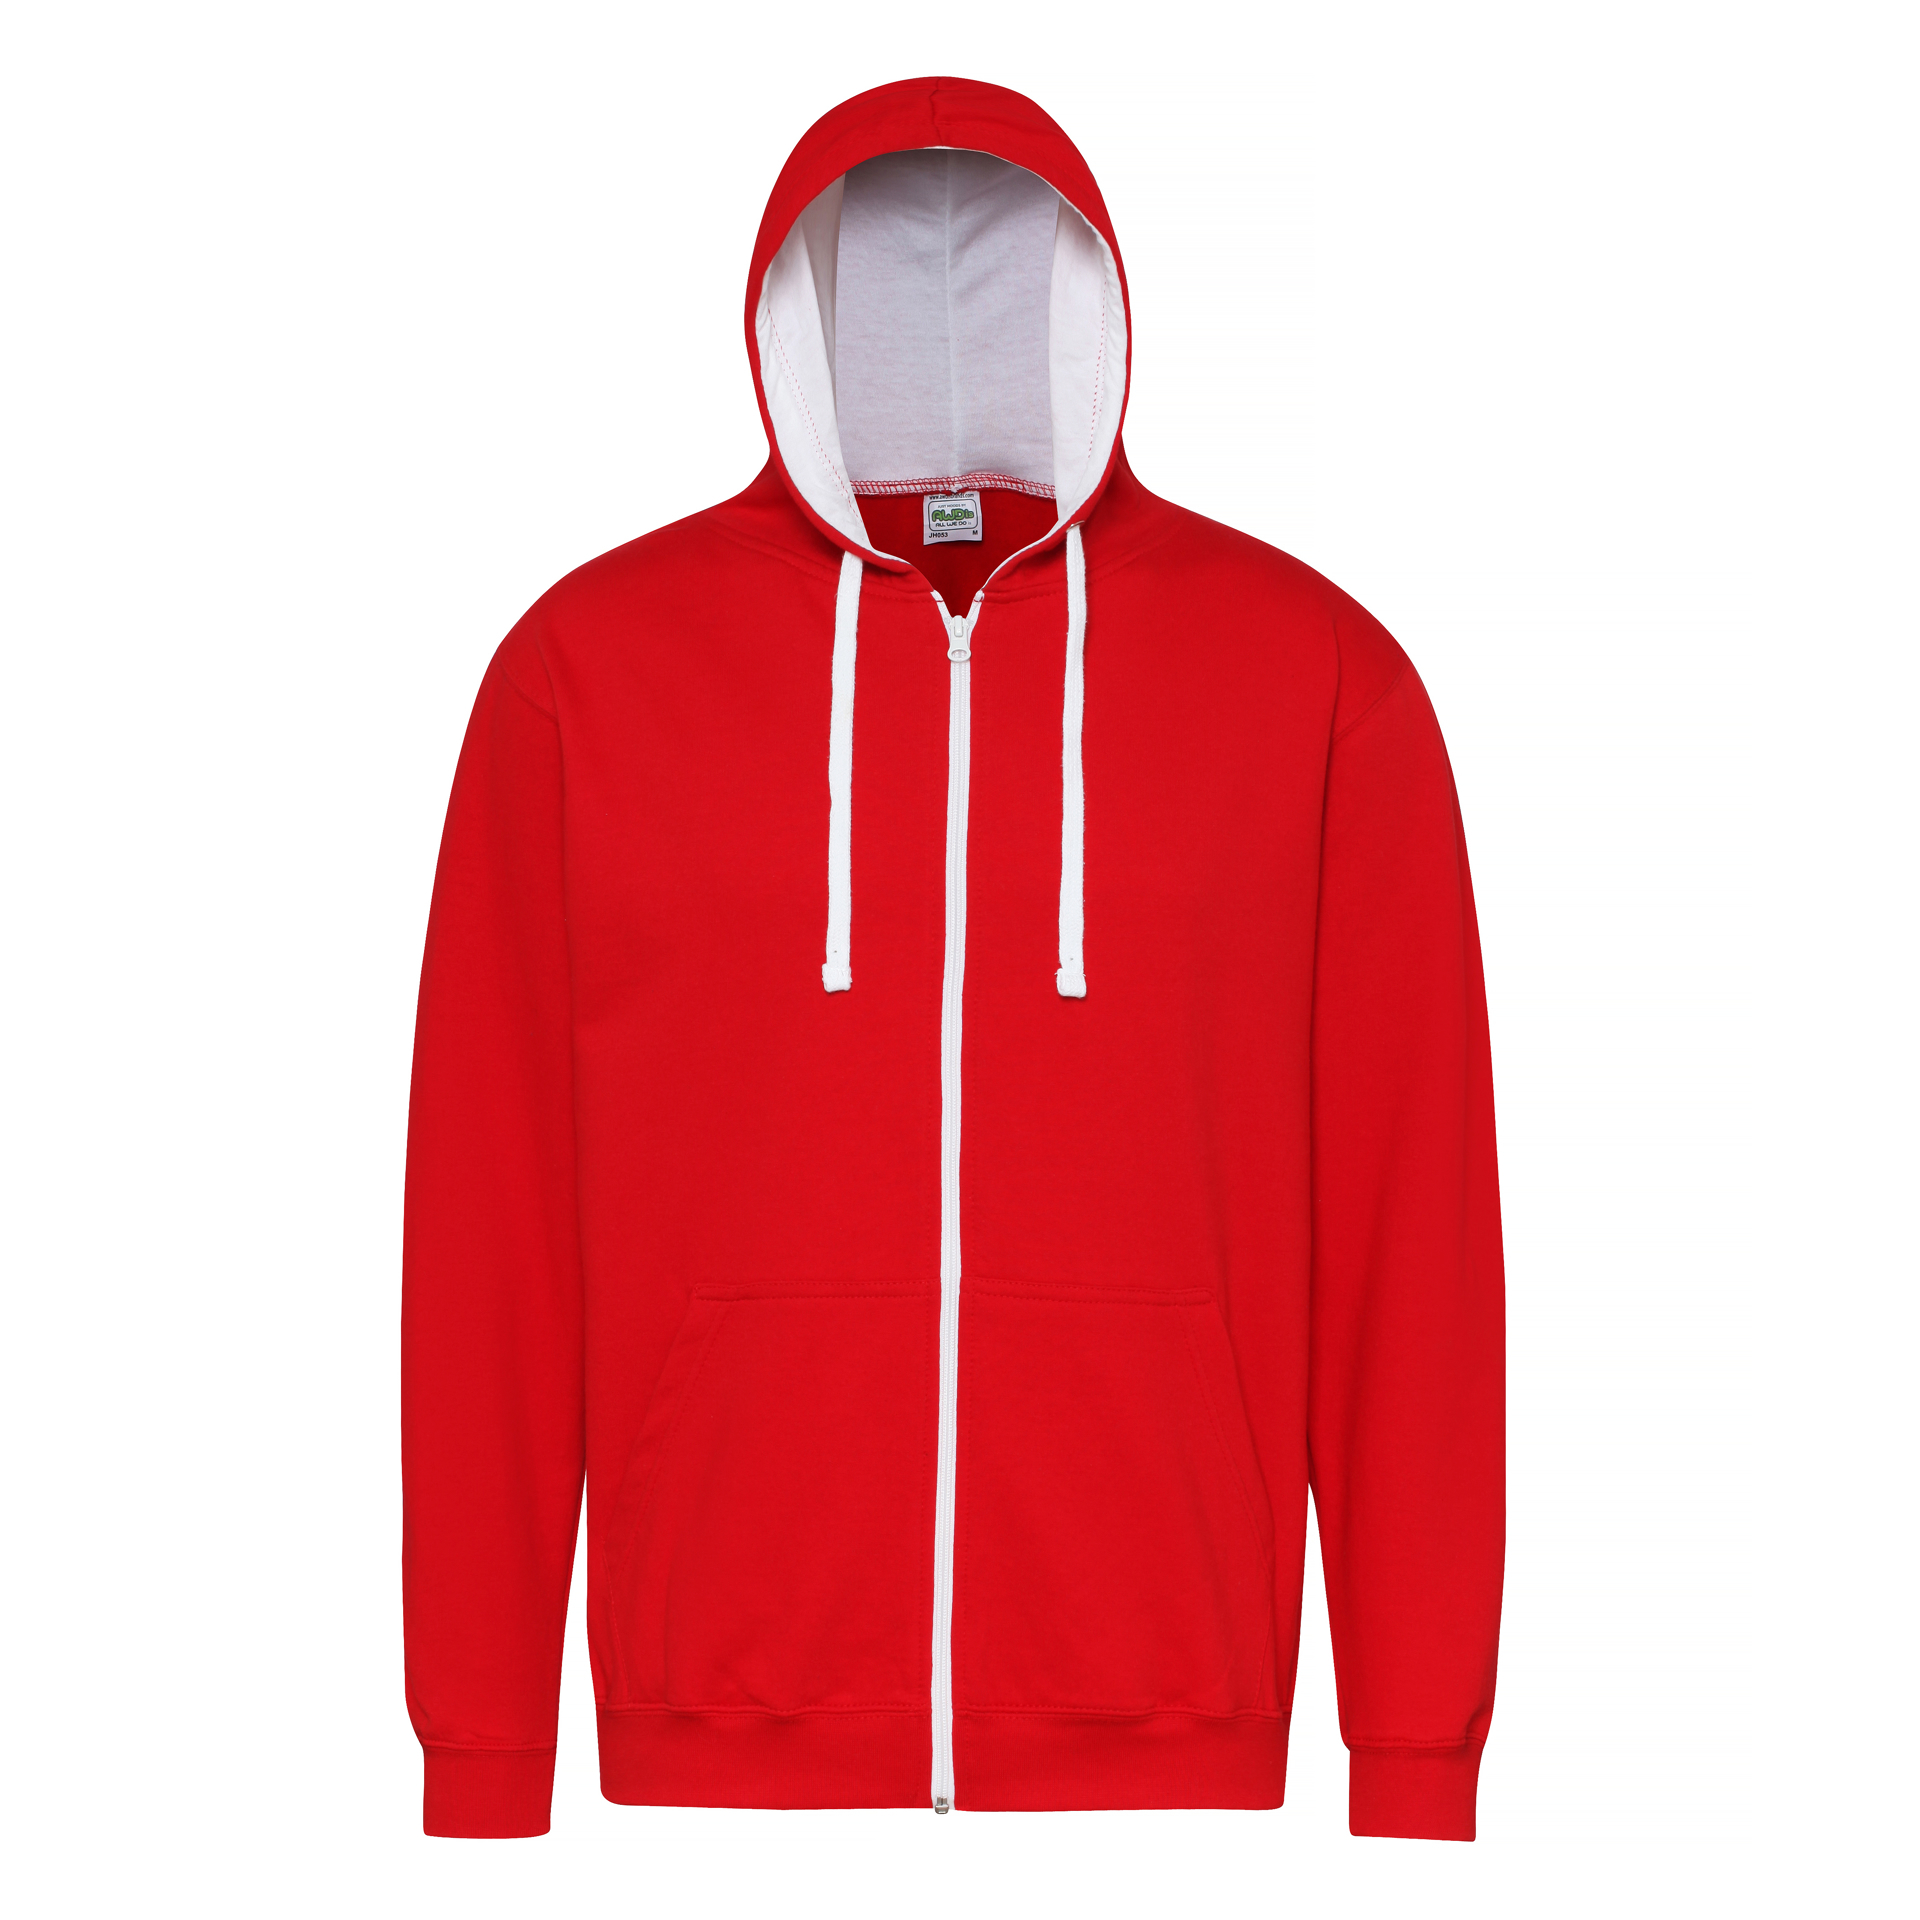 Men's Varsity Hoodie in red with white details and lining